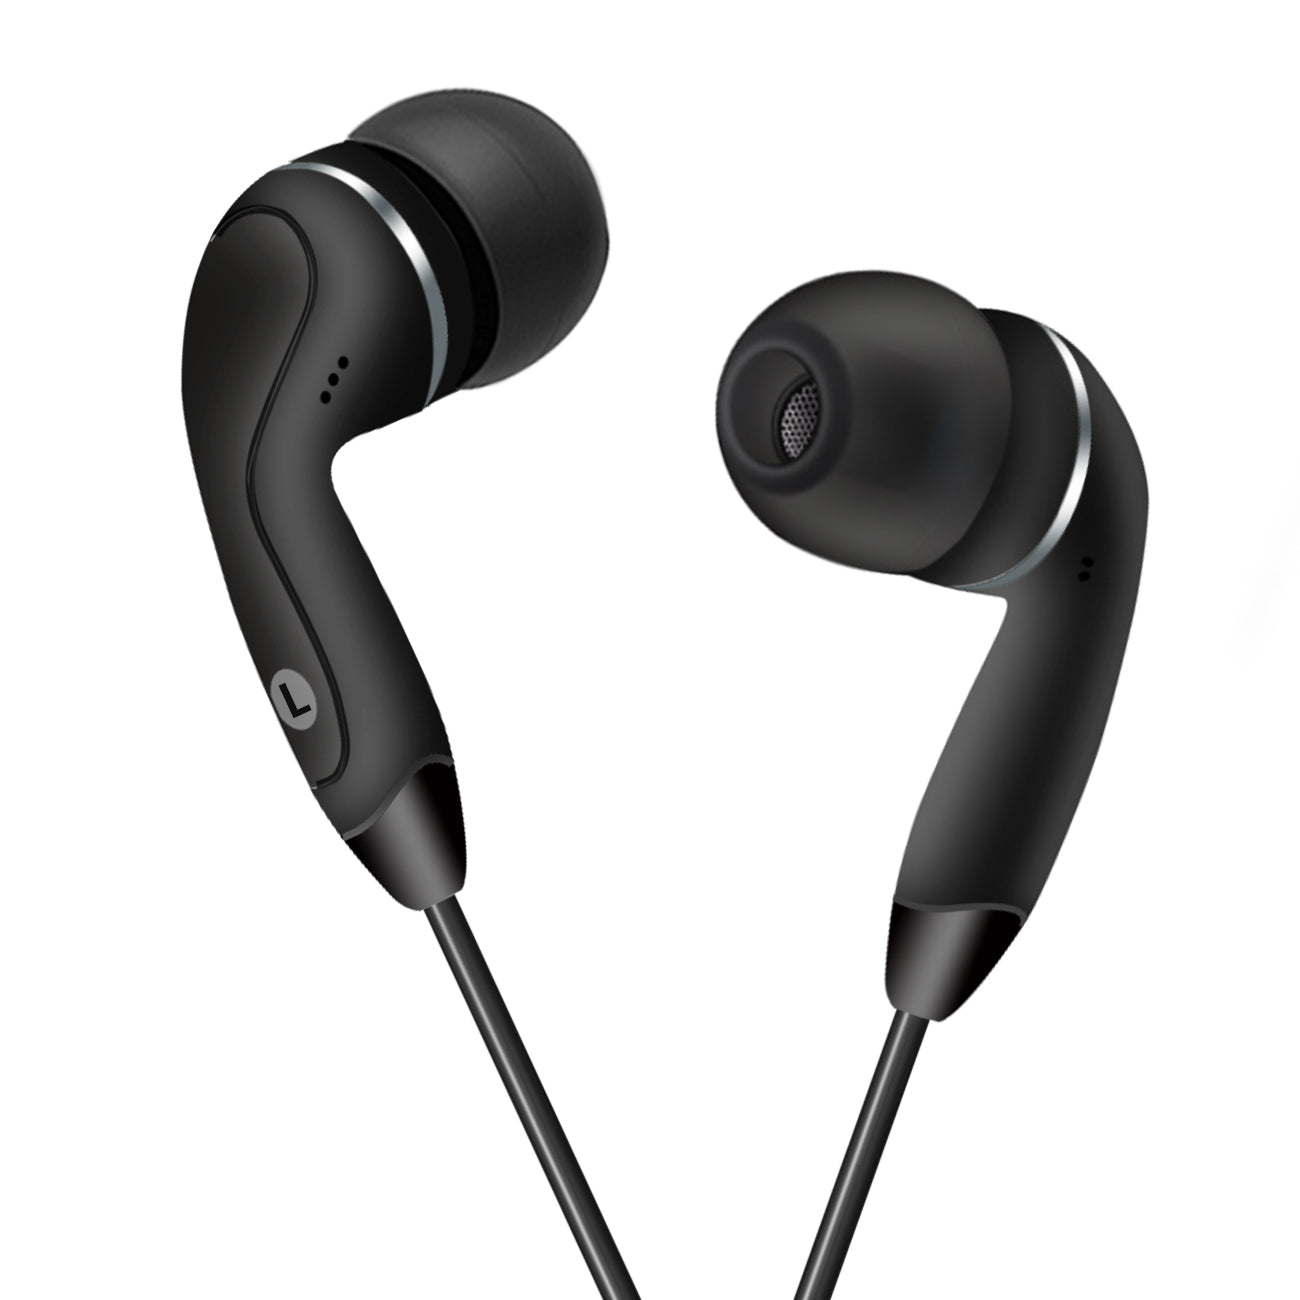 IN-EAR HEADPHONES WITH MIC FOR TYPE-C IN BLACK